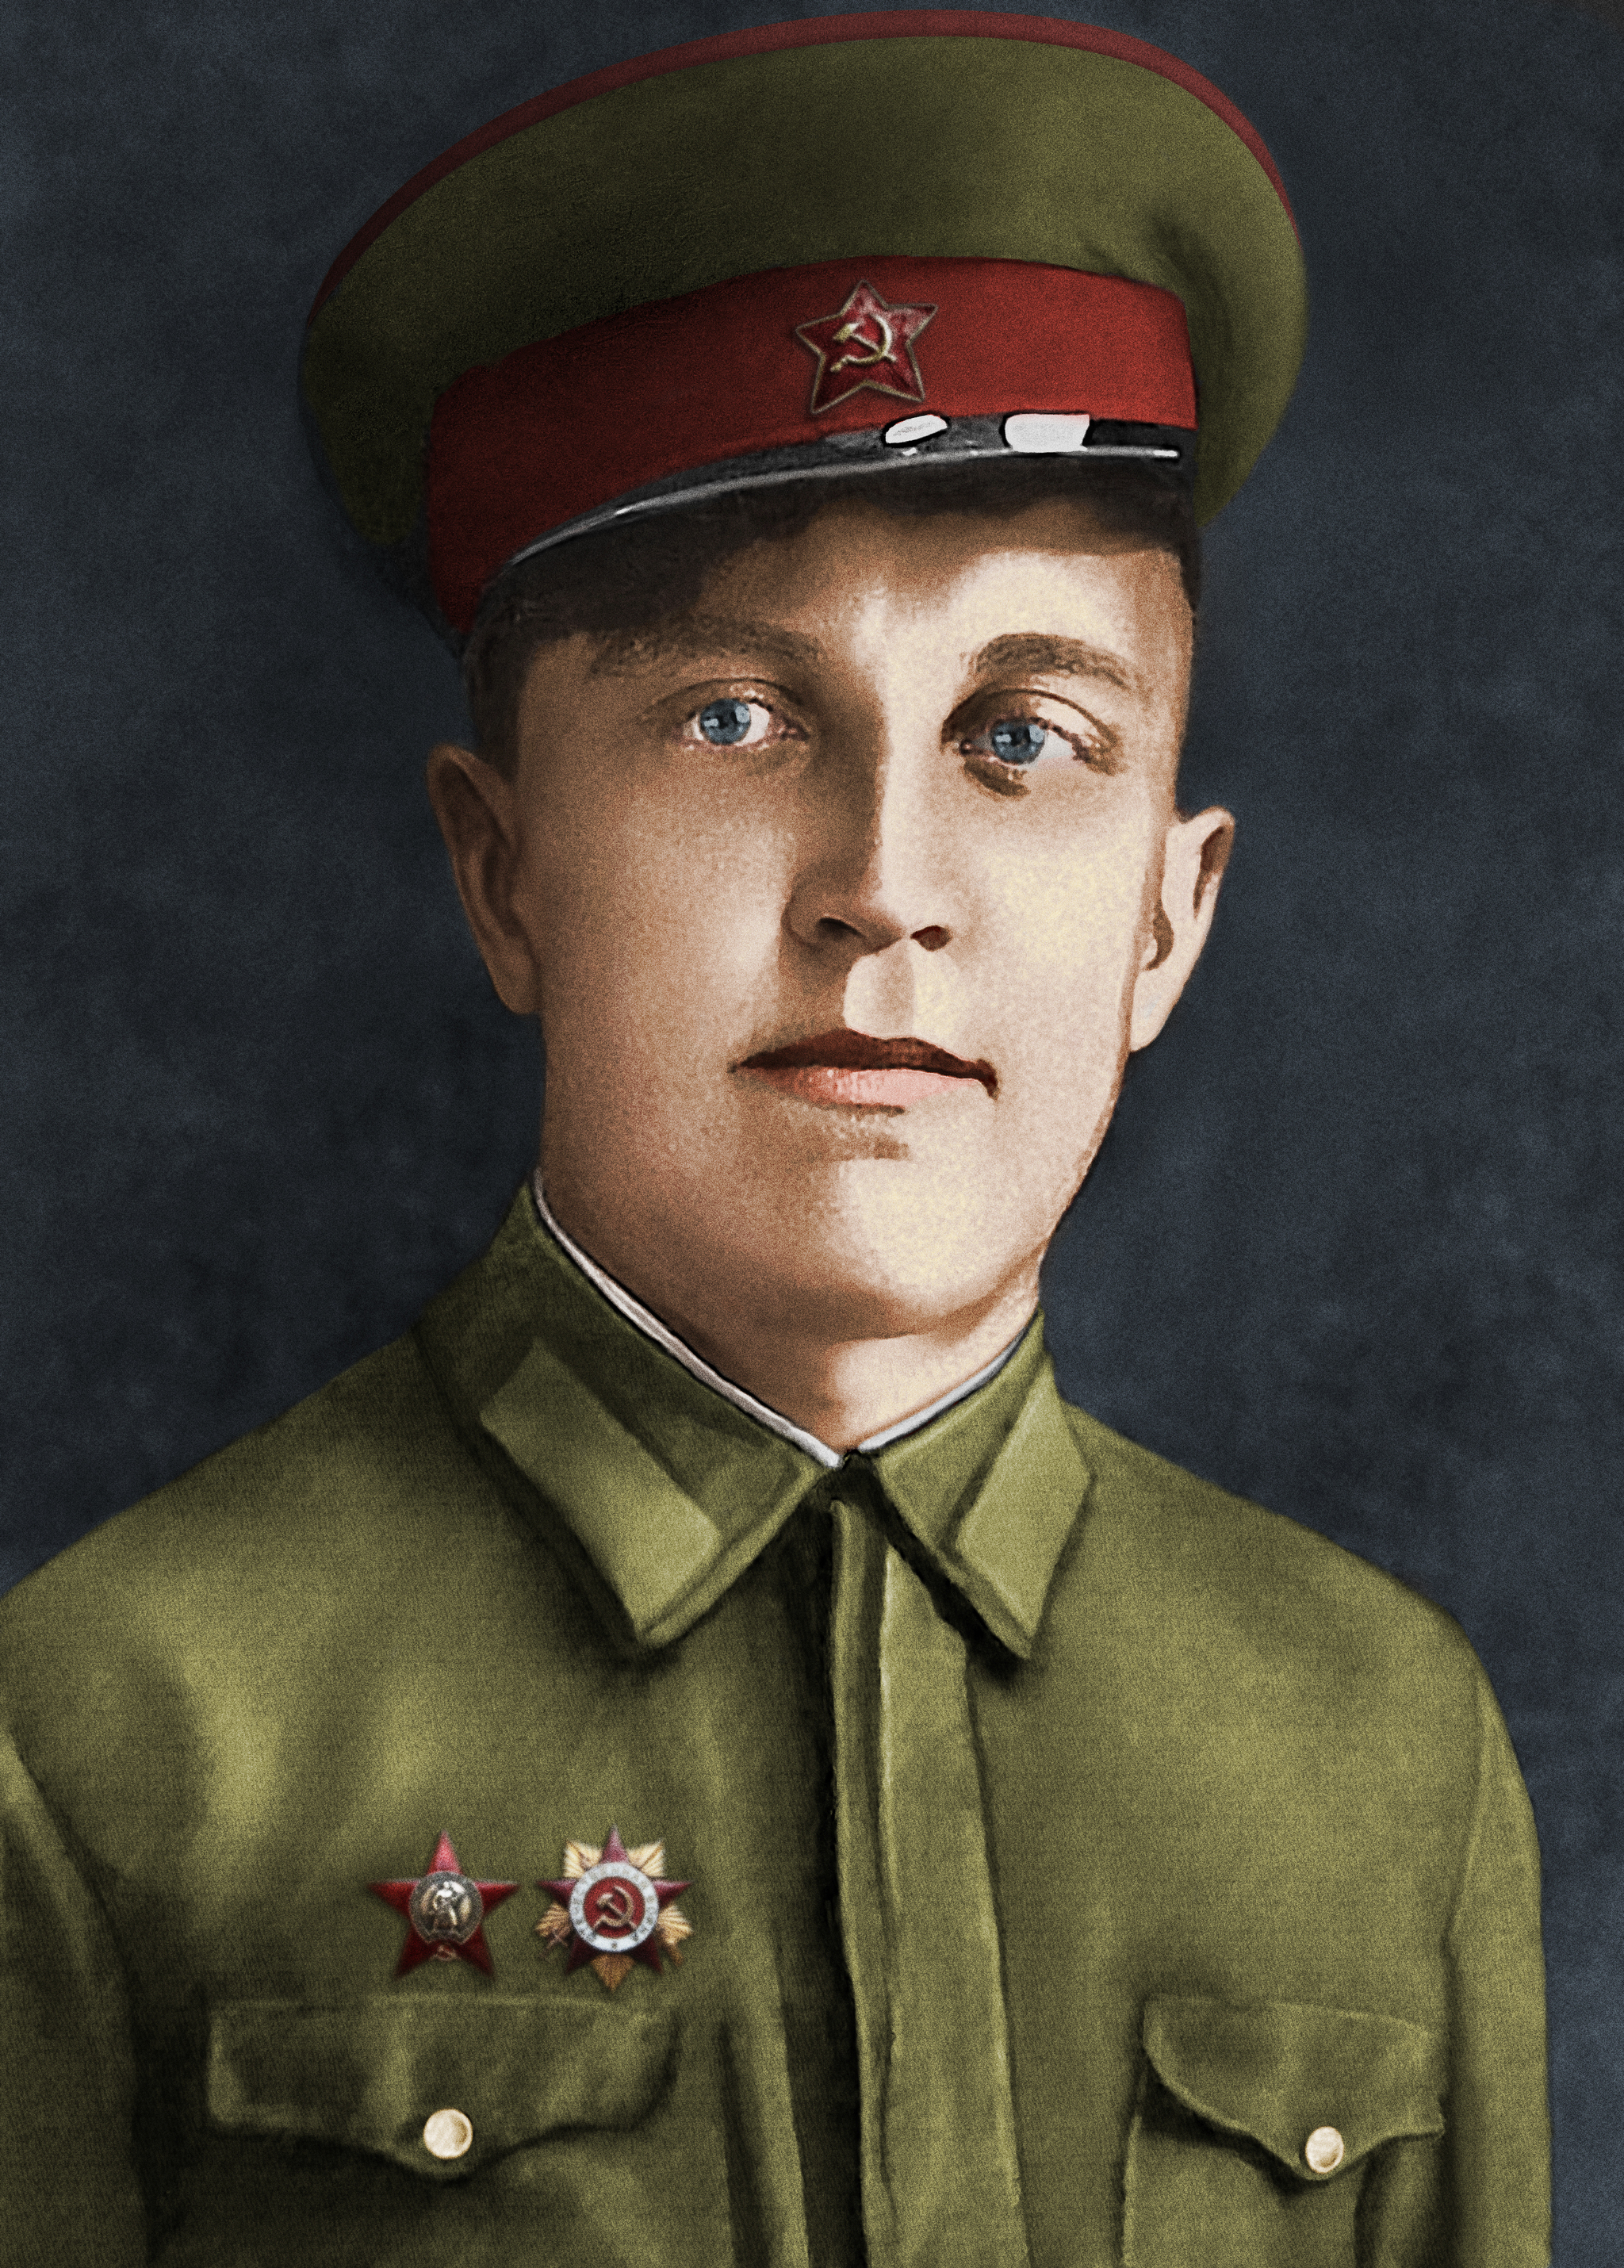 Restoration and colorization - My, Photo restoration, Colorization, The Great Patriotic War, The Second World War, Military photos, Photoshop, Longpost